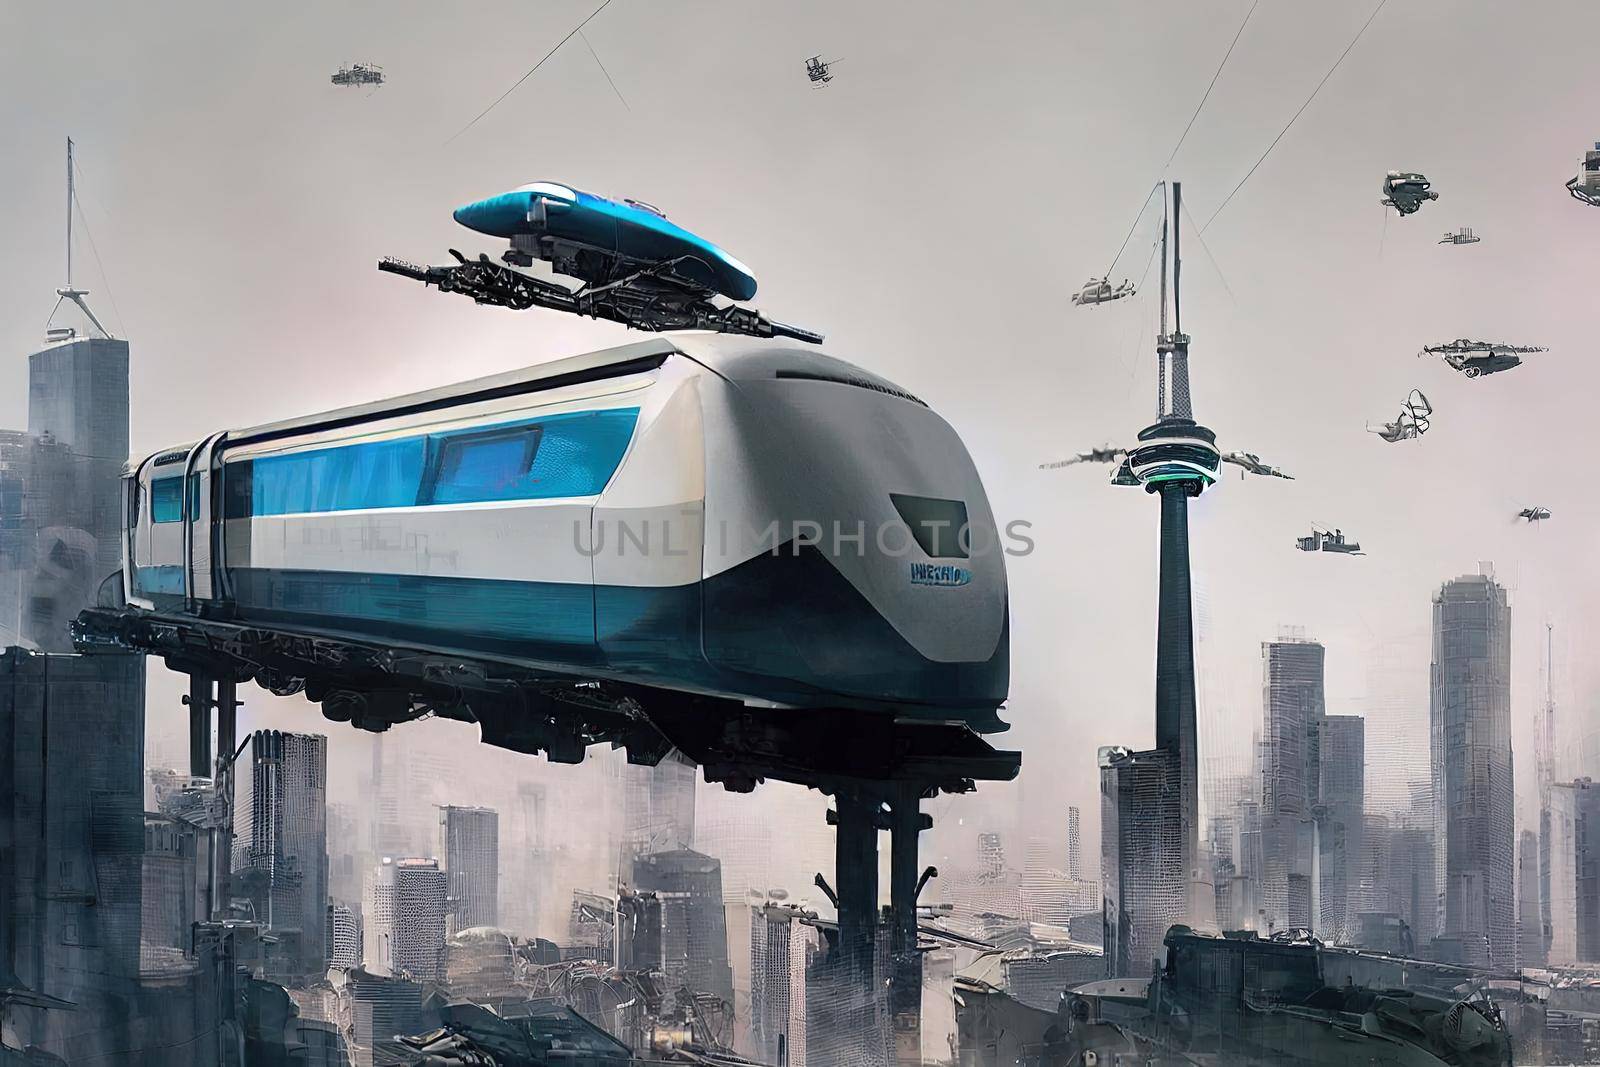 areal shot over elevated maglev train in downtown, architectures, streets of advanced technology in a metropolis, futuristic, advanced hovering flying technology. High quality illustration